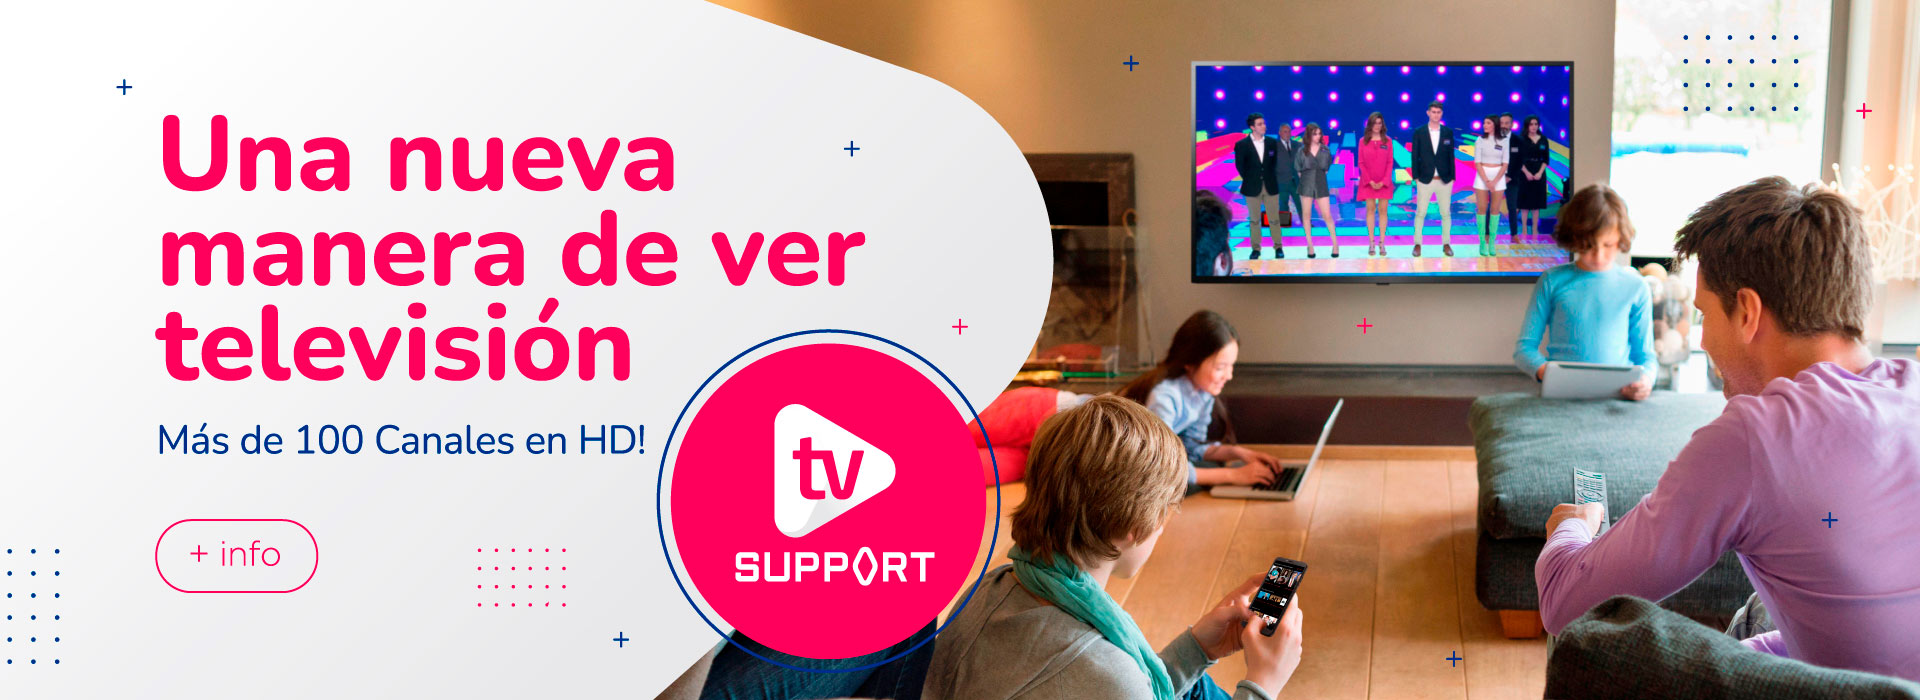 SUPPORT TV